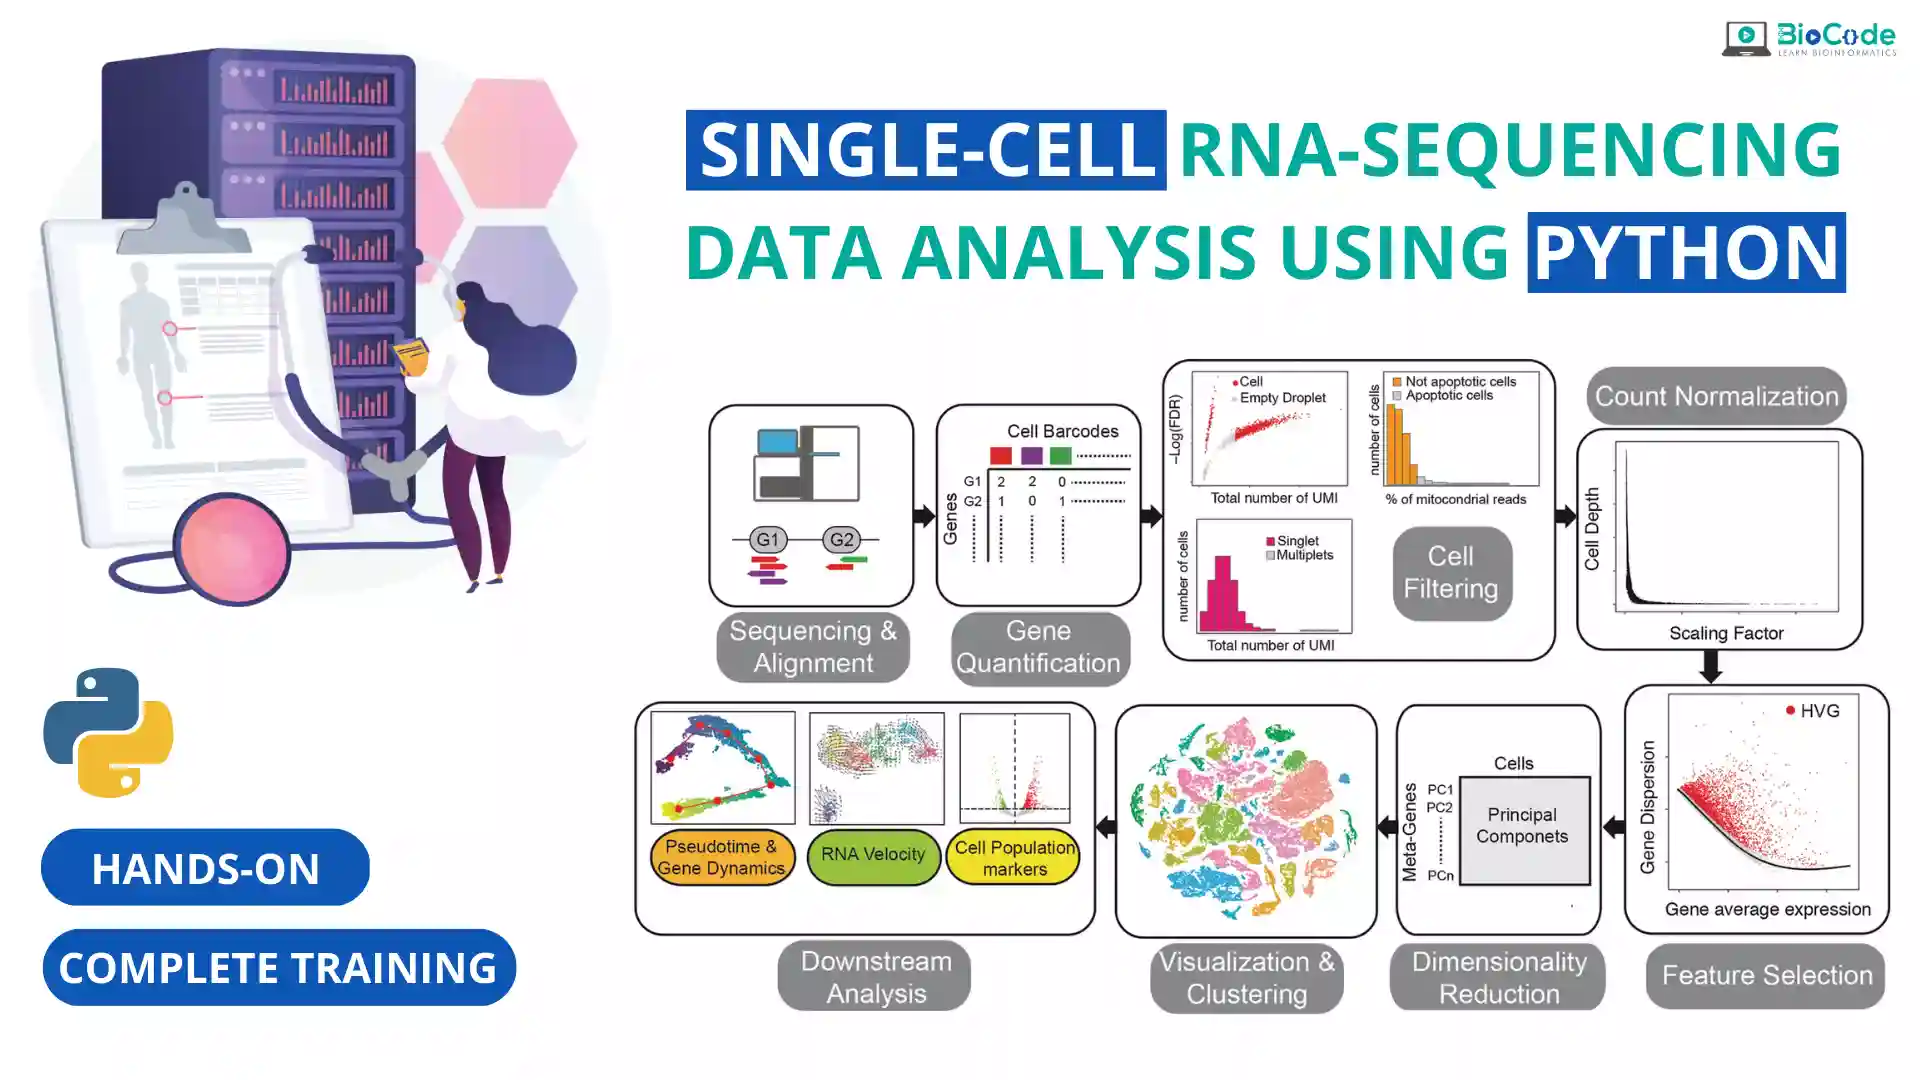 Hands-on: Single-Cell RNA-Sequencing Data Analysis Using Python [Complete Training]